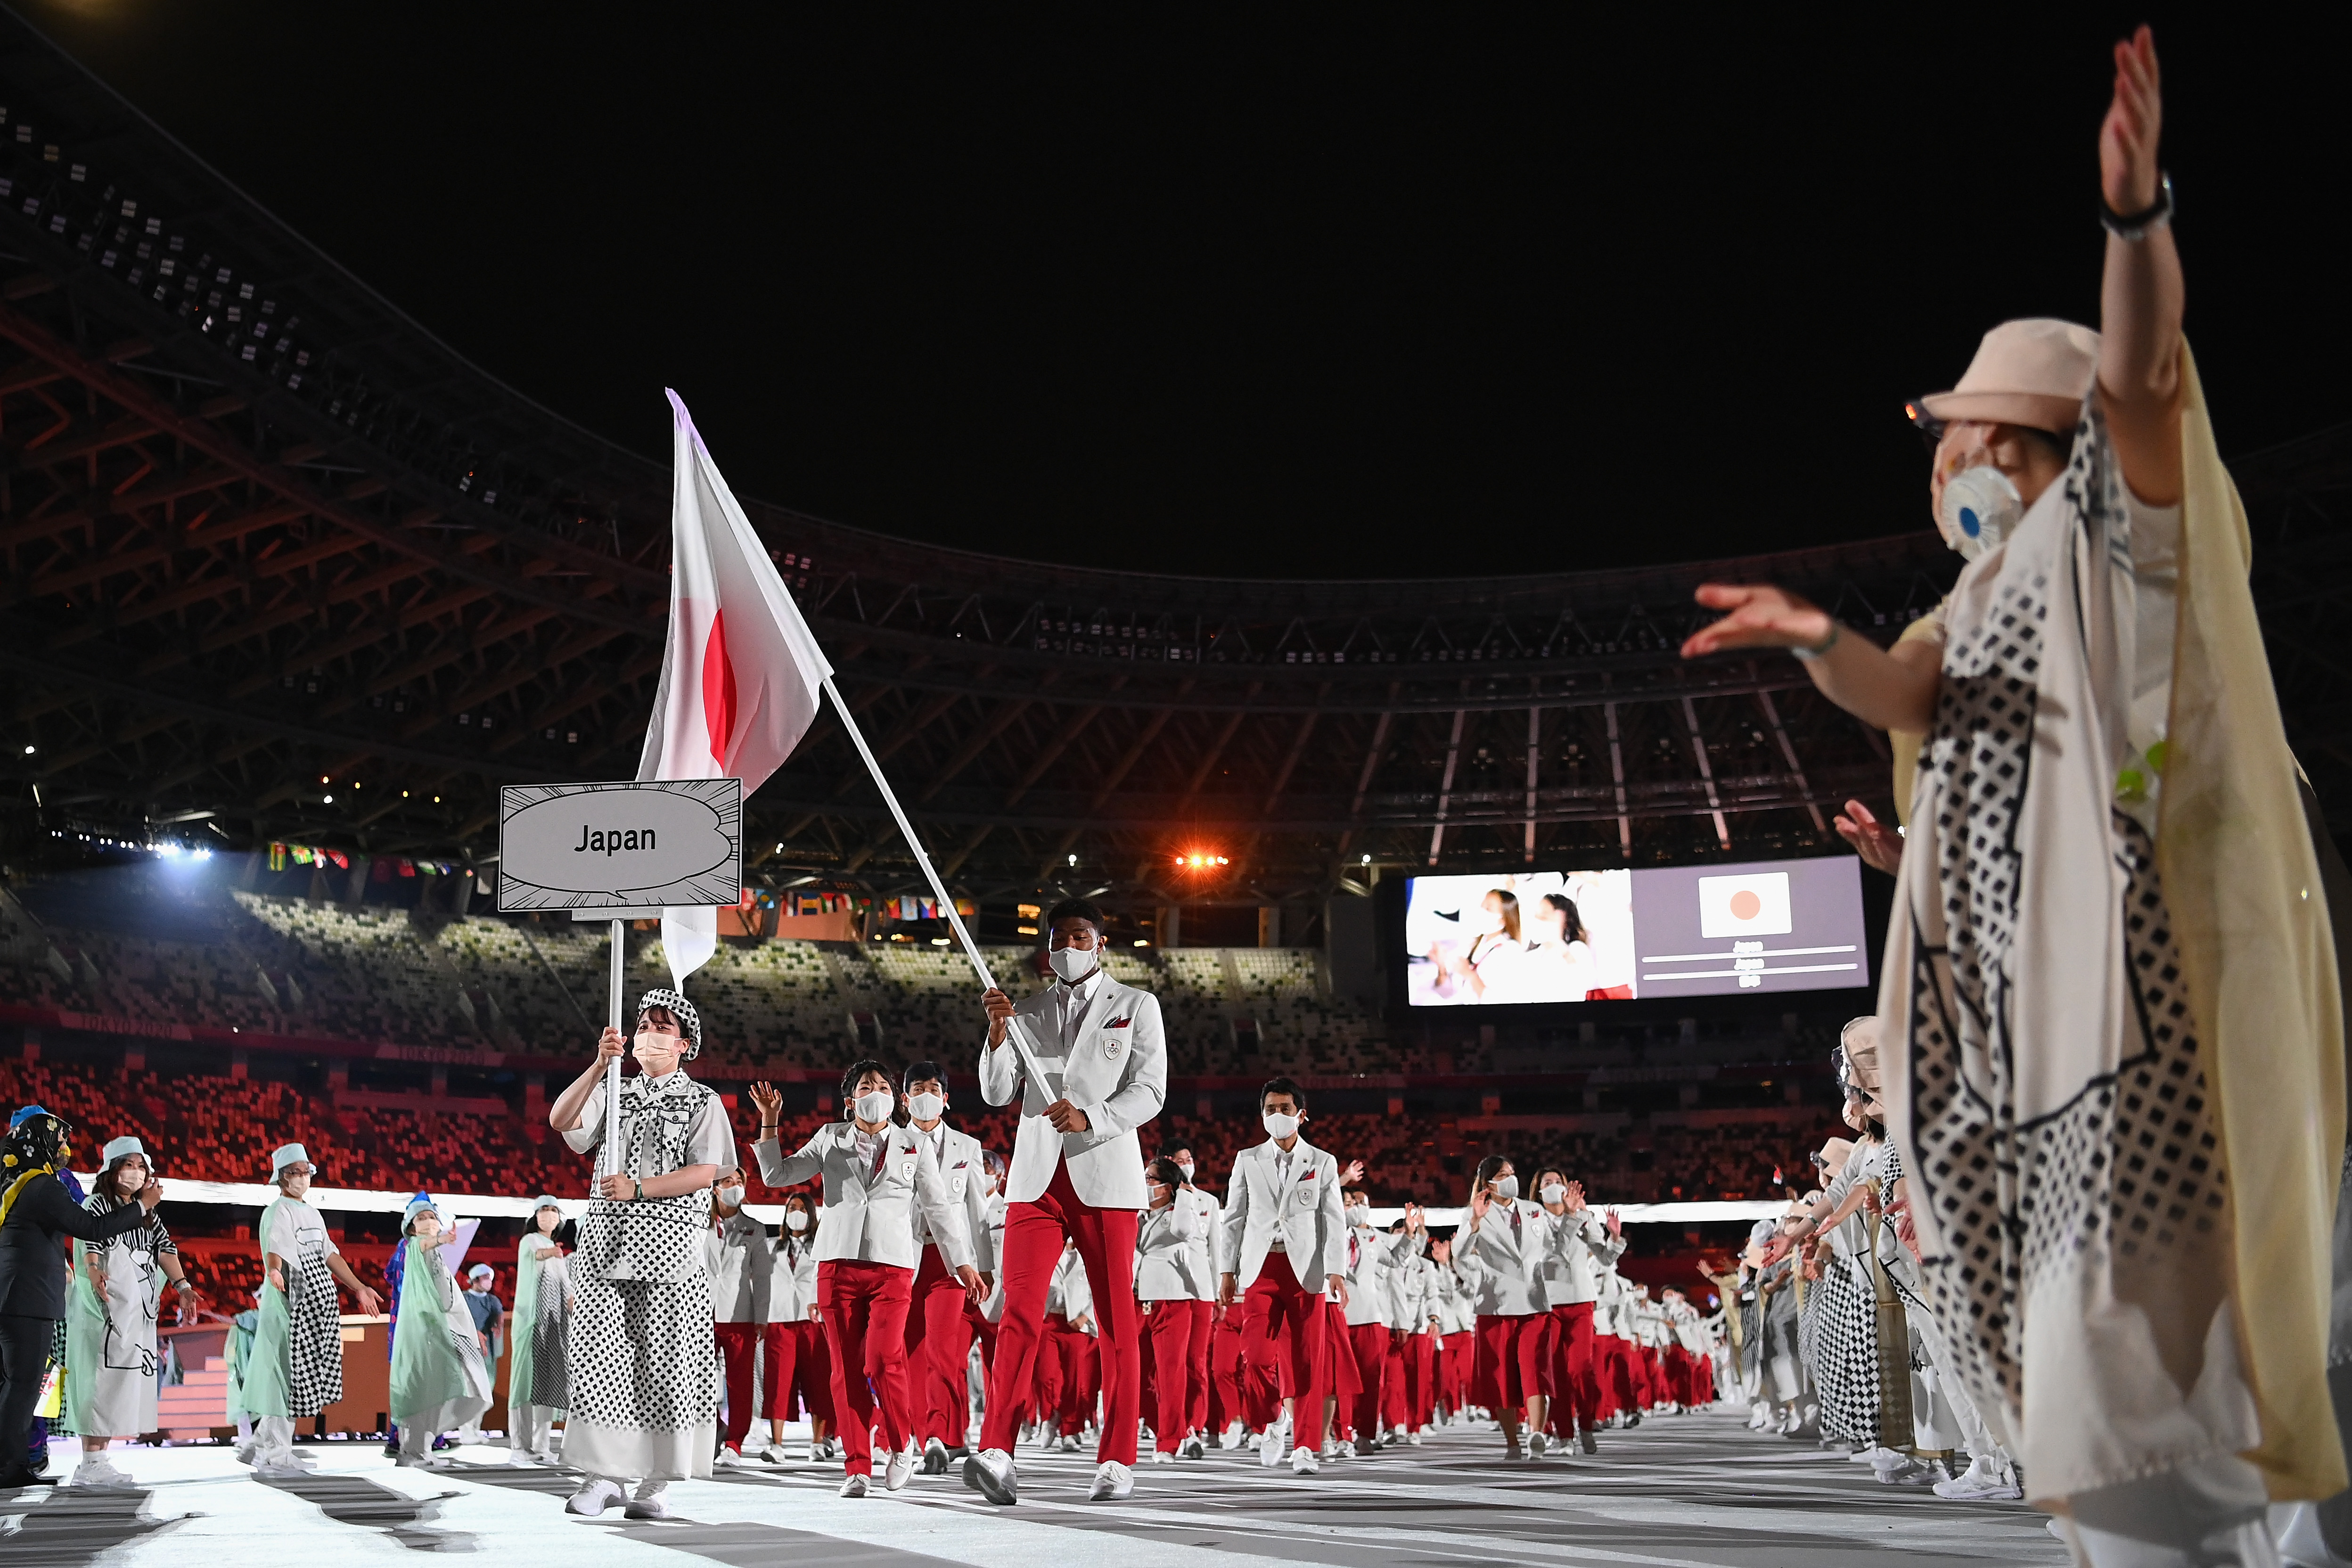 Flag bearers Yui Susaki and Rui Hachimura of Team Japan lead their team in during the Opening Ceremony of the Tokyo 2020 Olympic Games at Olympic Stadium, on July 23, 2021, in Tokyo, Japan.| Source: Getty Images